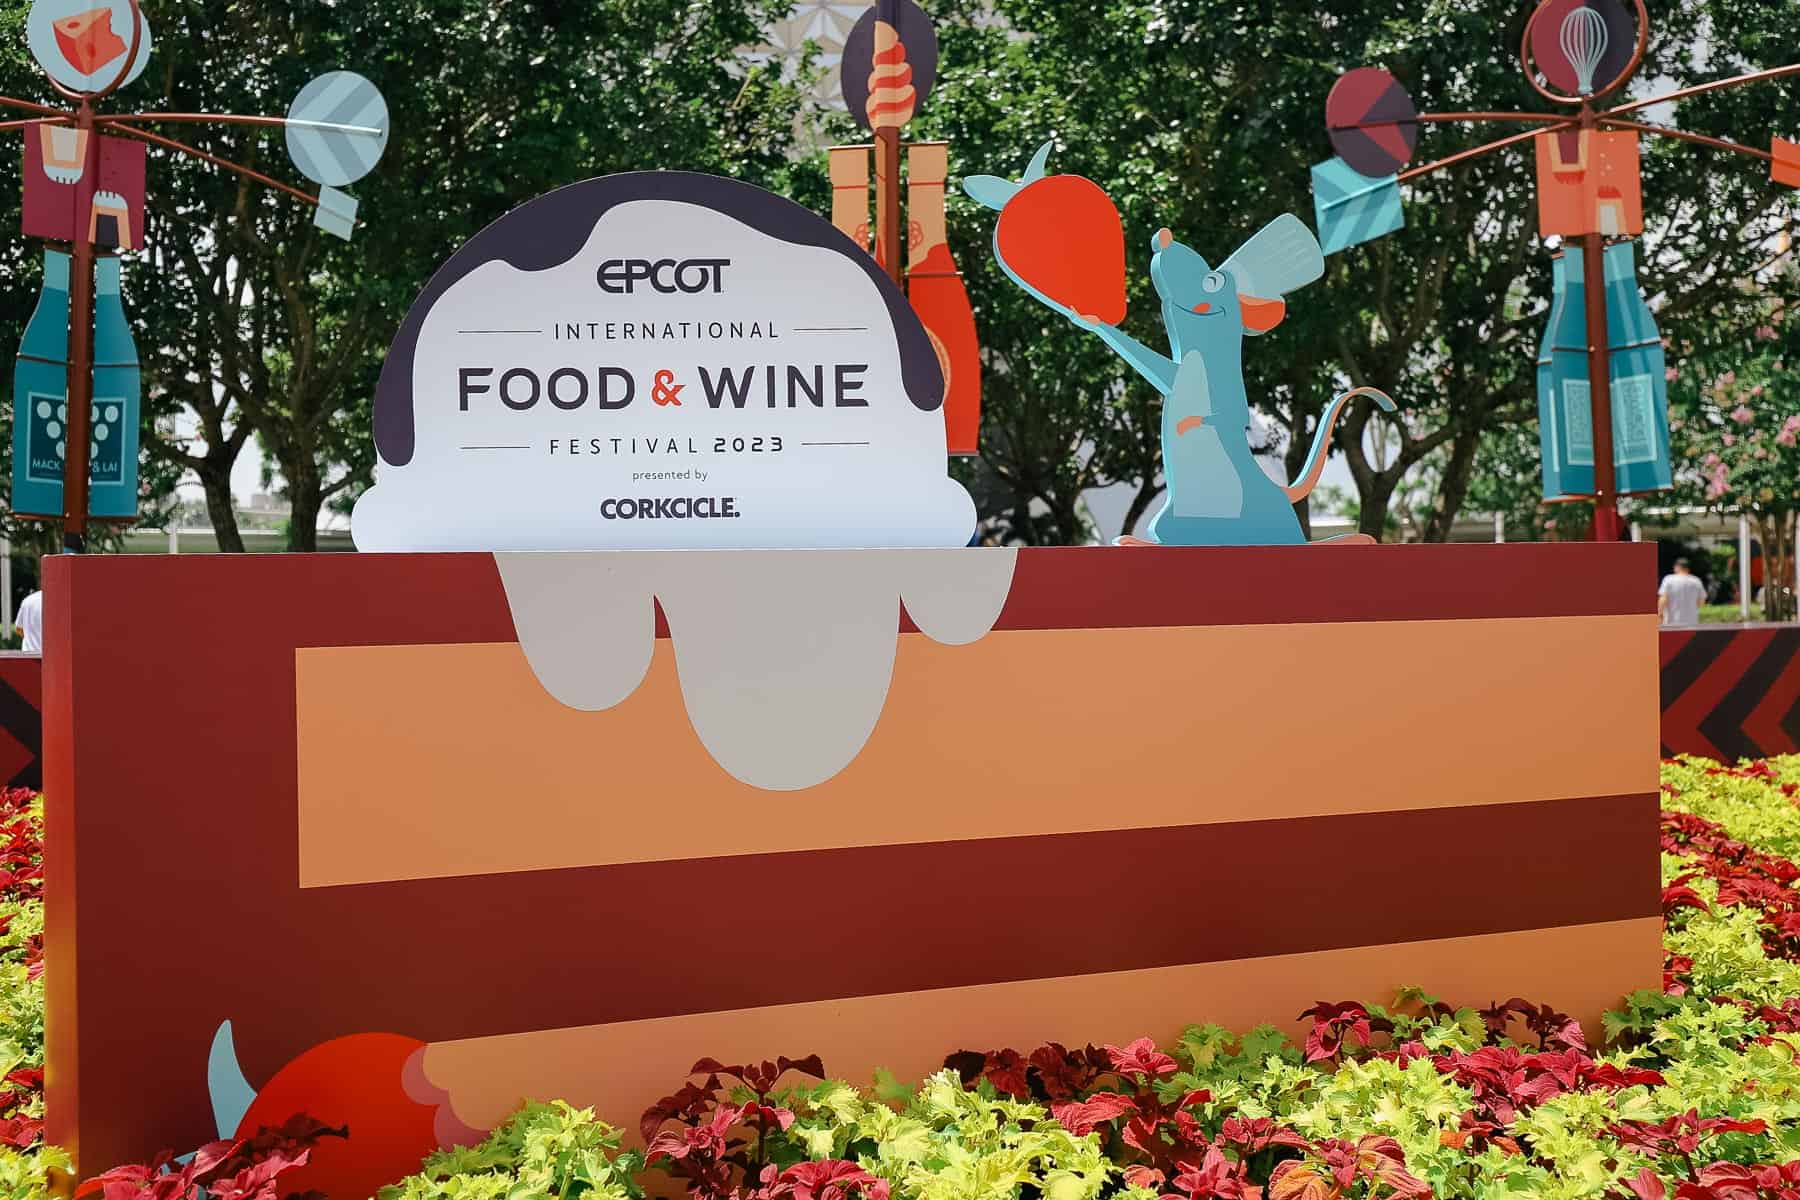 a display featuring a giant slice of cake at Epcot's Food and Wine Festival 